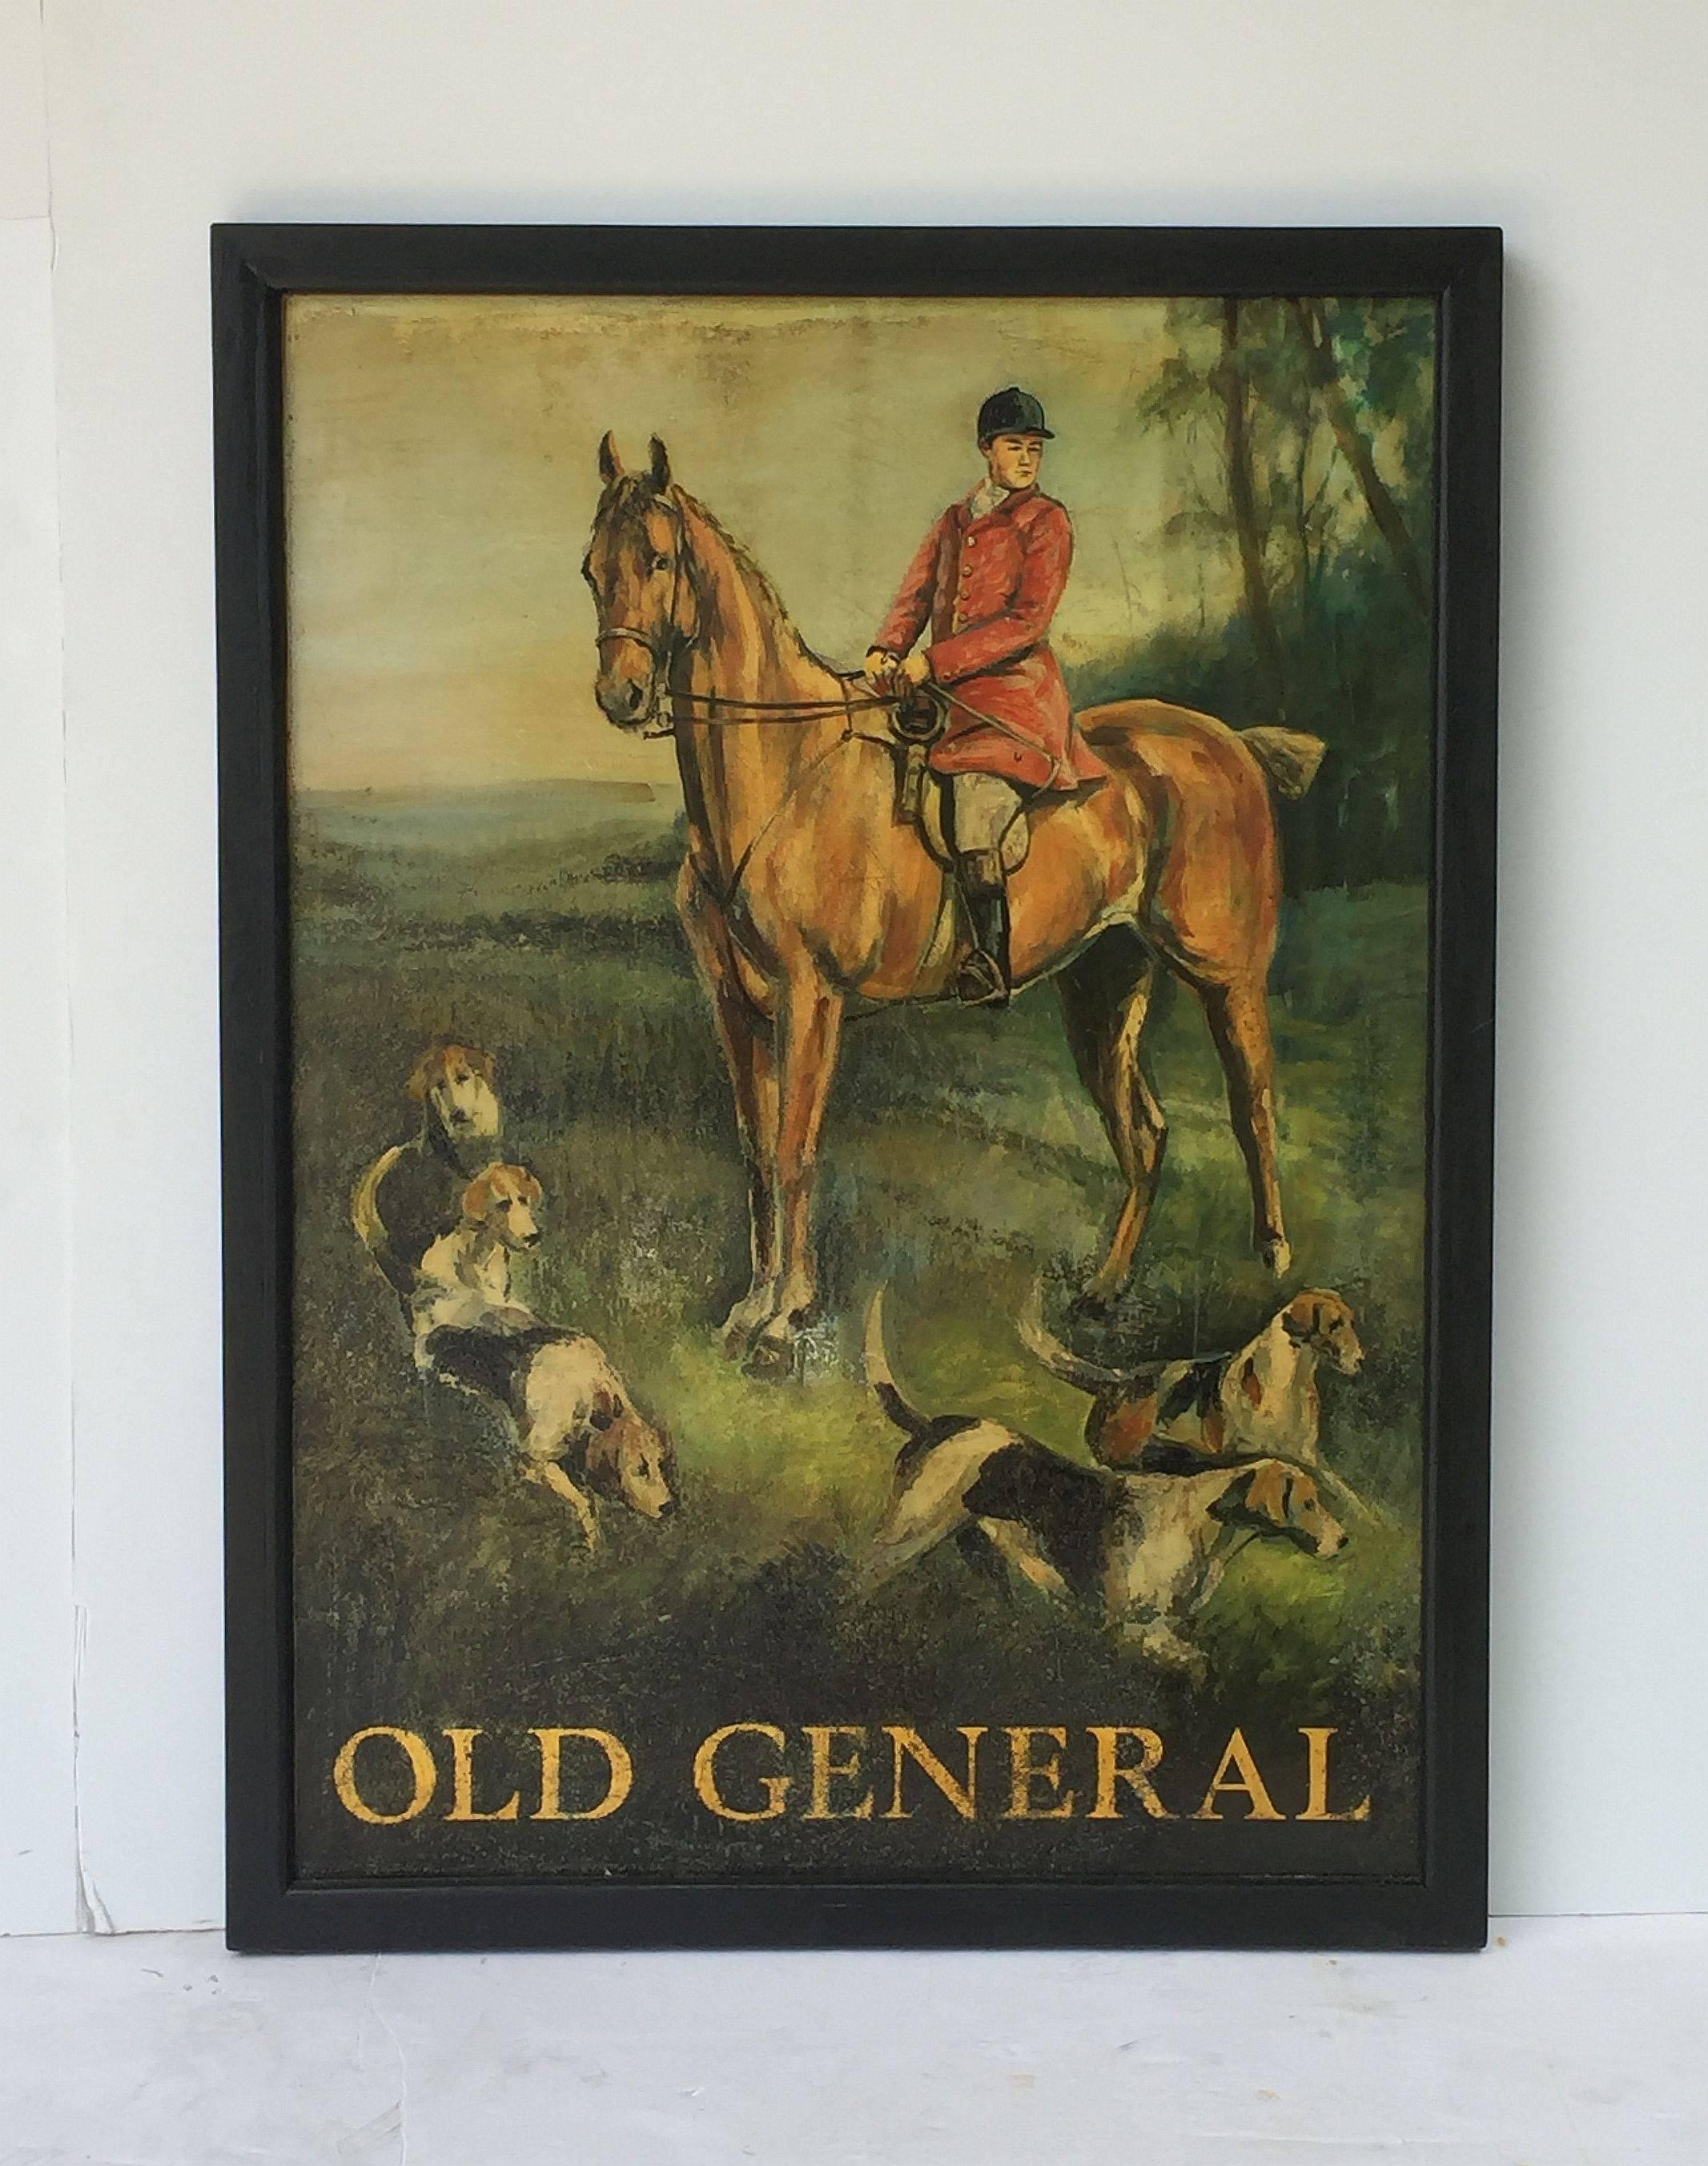 An authentic English pub sign (one-sided) featuring a painting of a man in full English hunt regalia astride a horse, with beagle hunting dogs, and a cluster of trees in the background, entitled: Old General

A very fine example of vintage